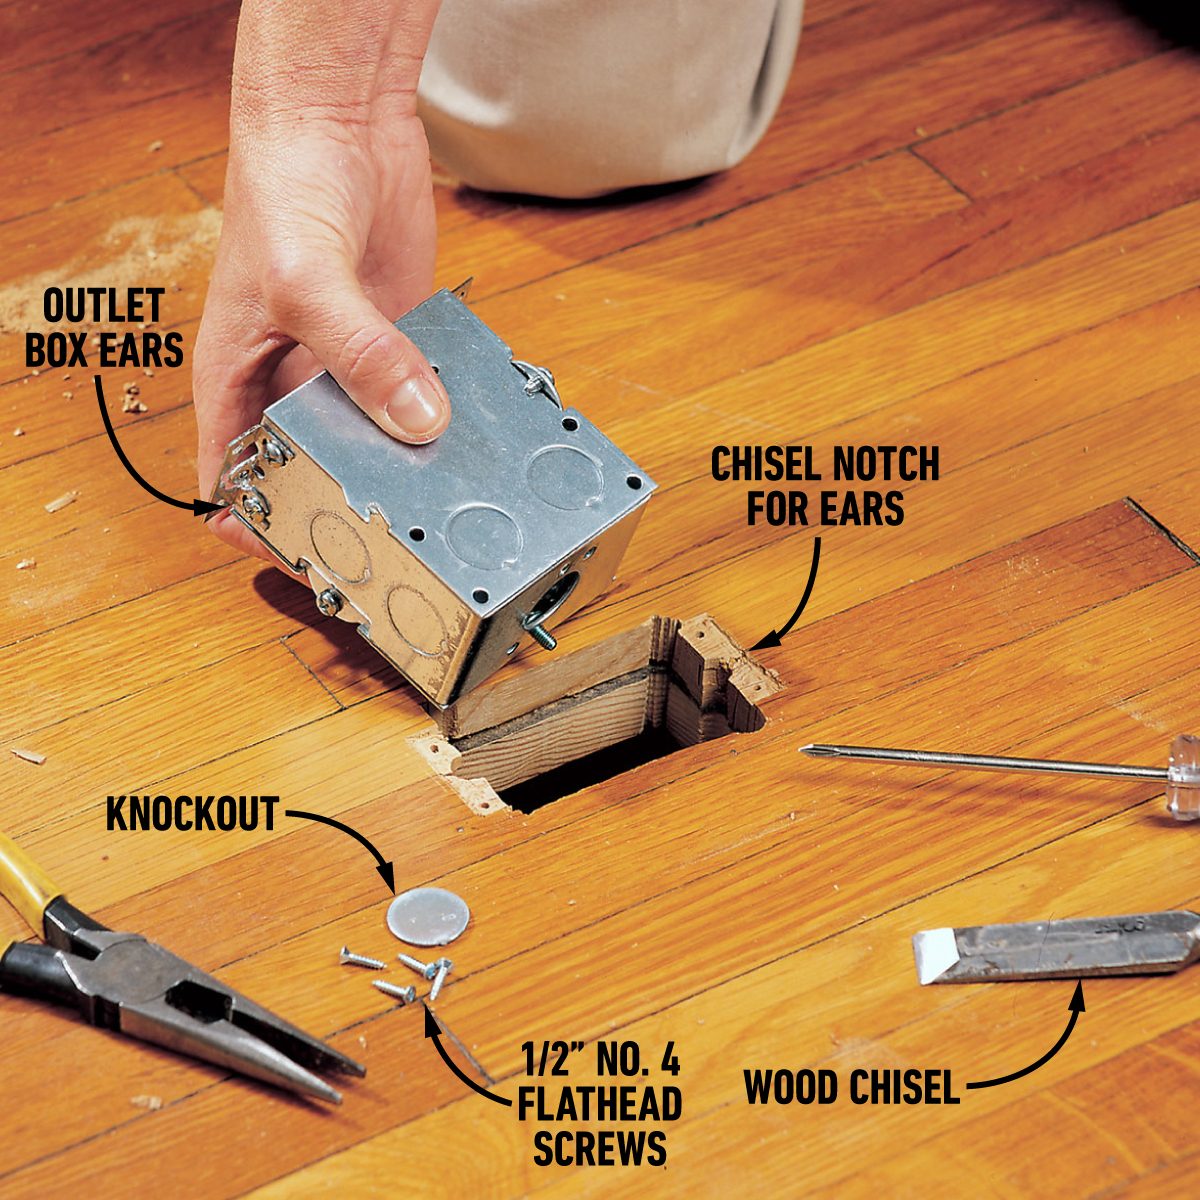 How To Install A Floor Outlet